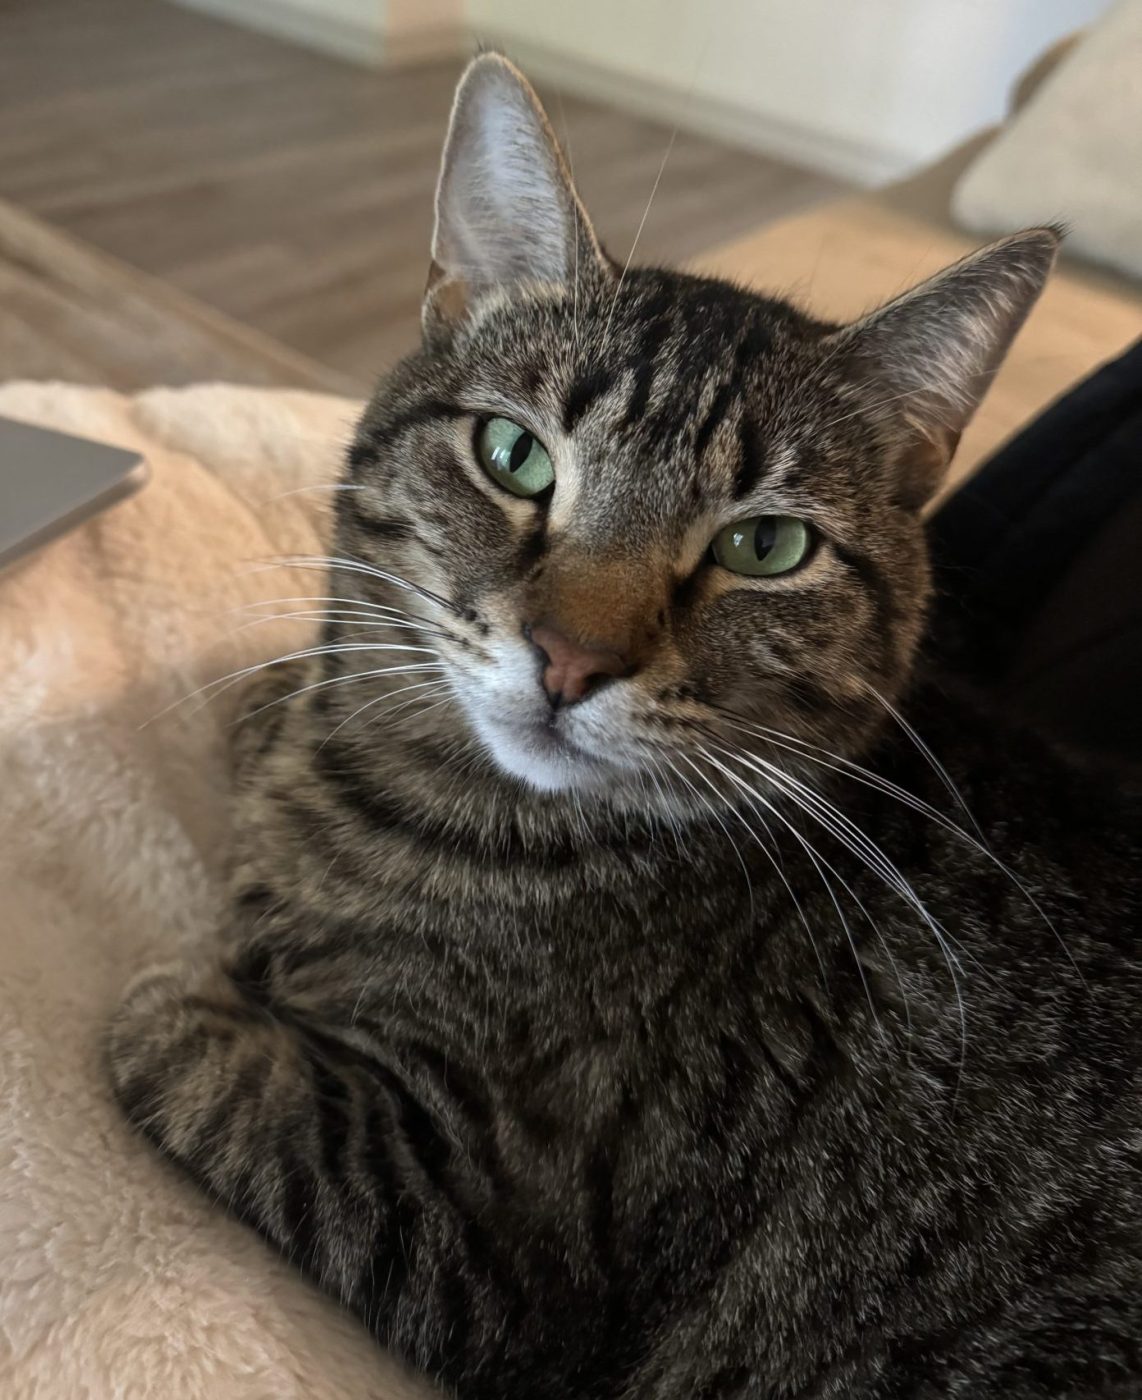 Brown tabby cat with very green eyes looking directly into the camera